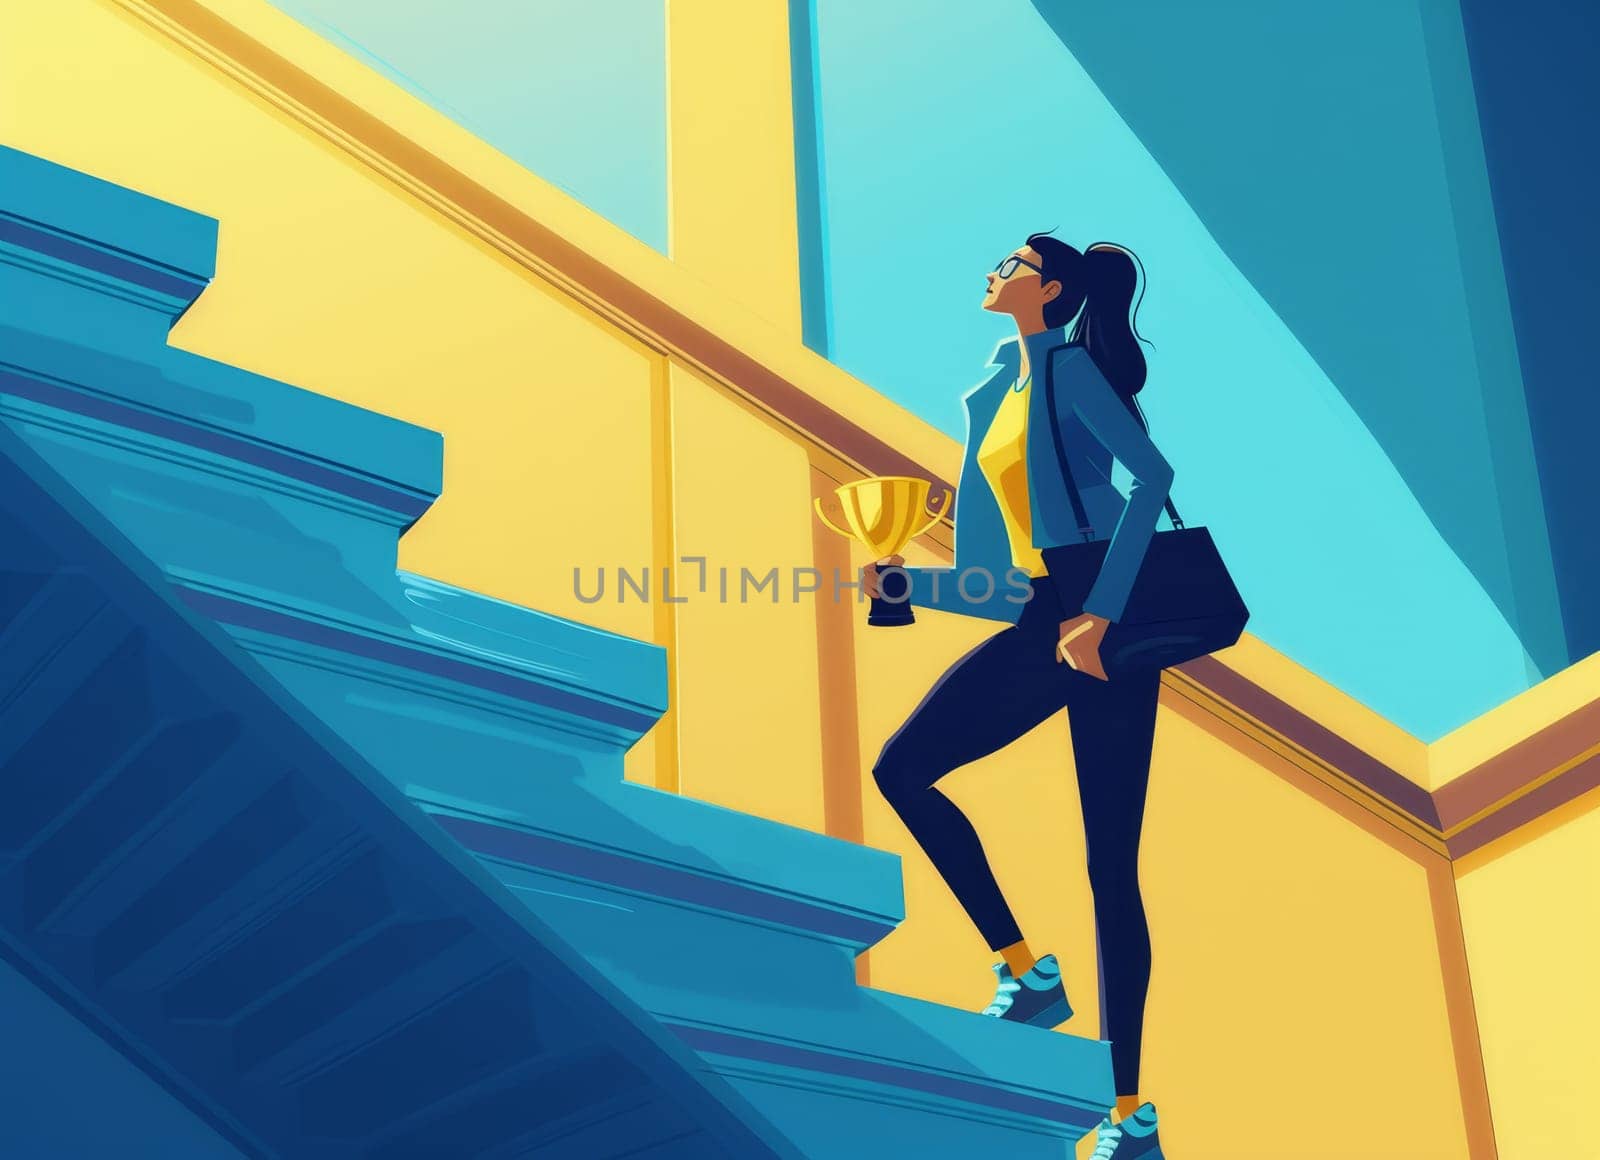 Stylized illustration of a woman on stairs with a trophy, symbolizing achievement